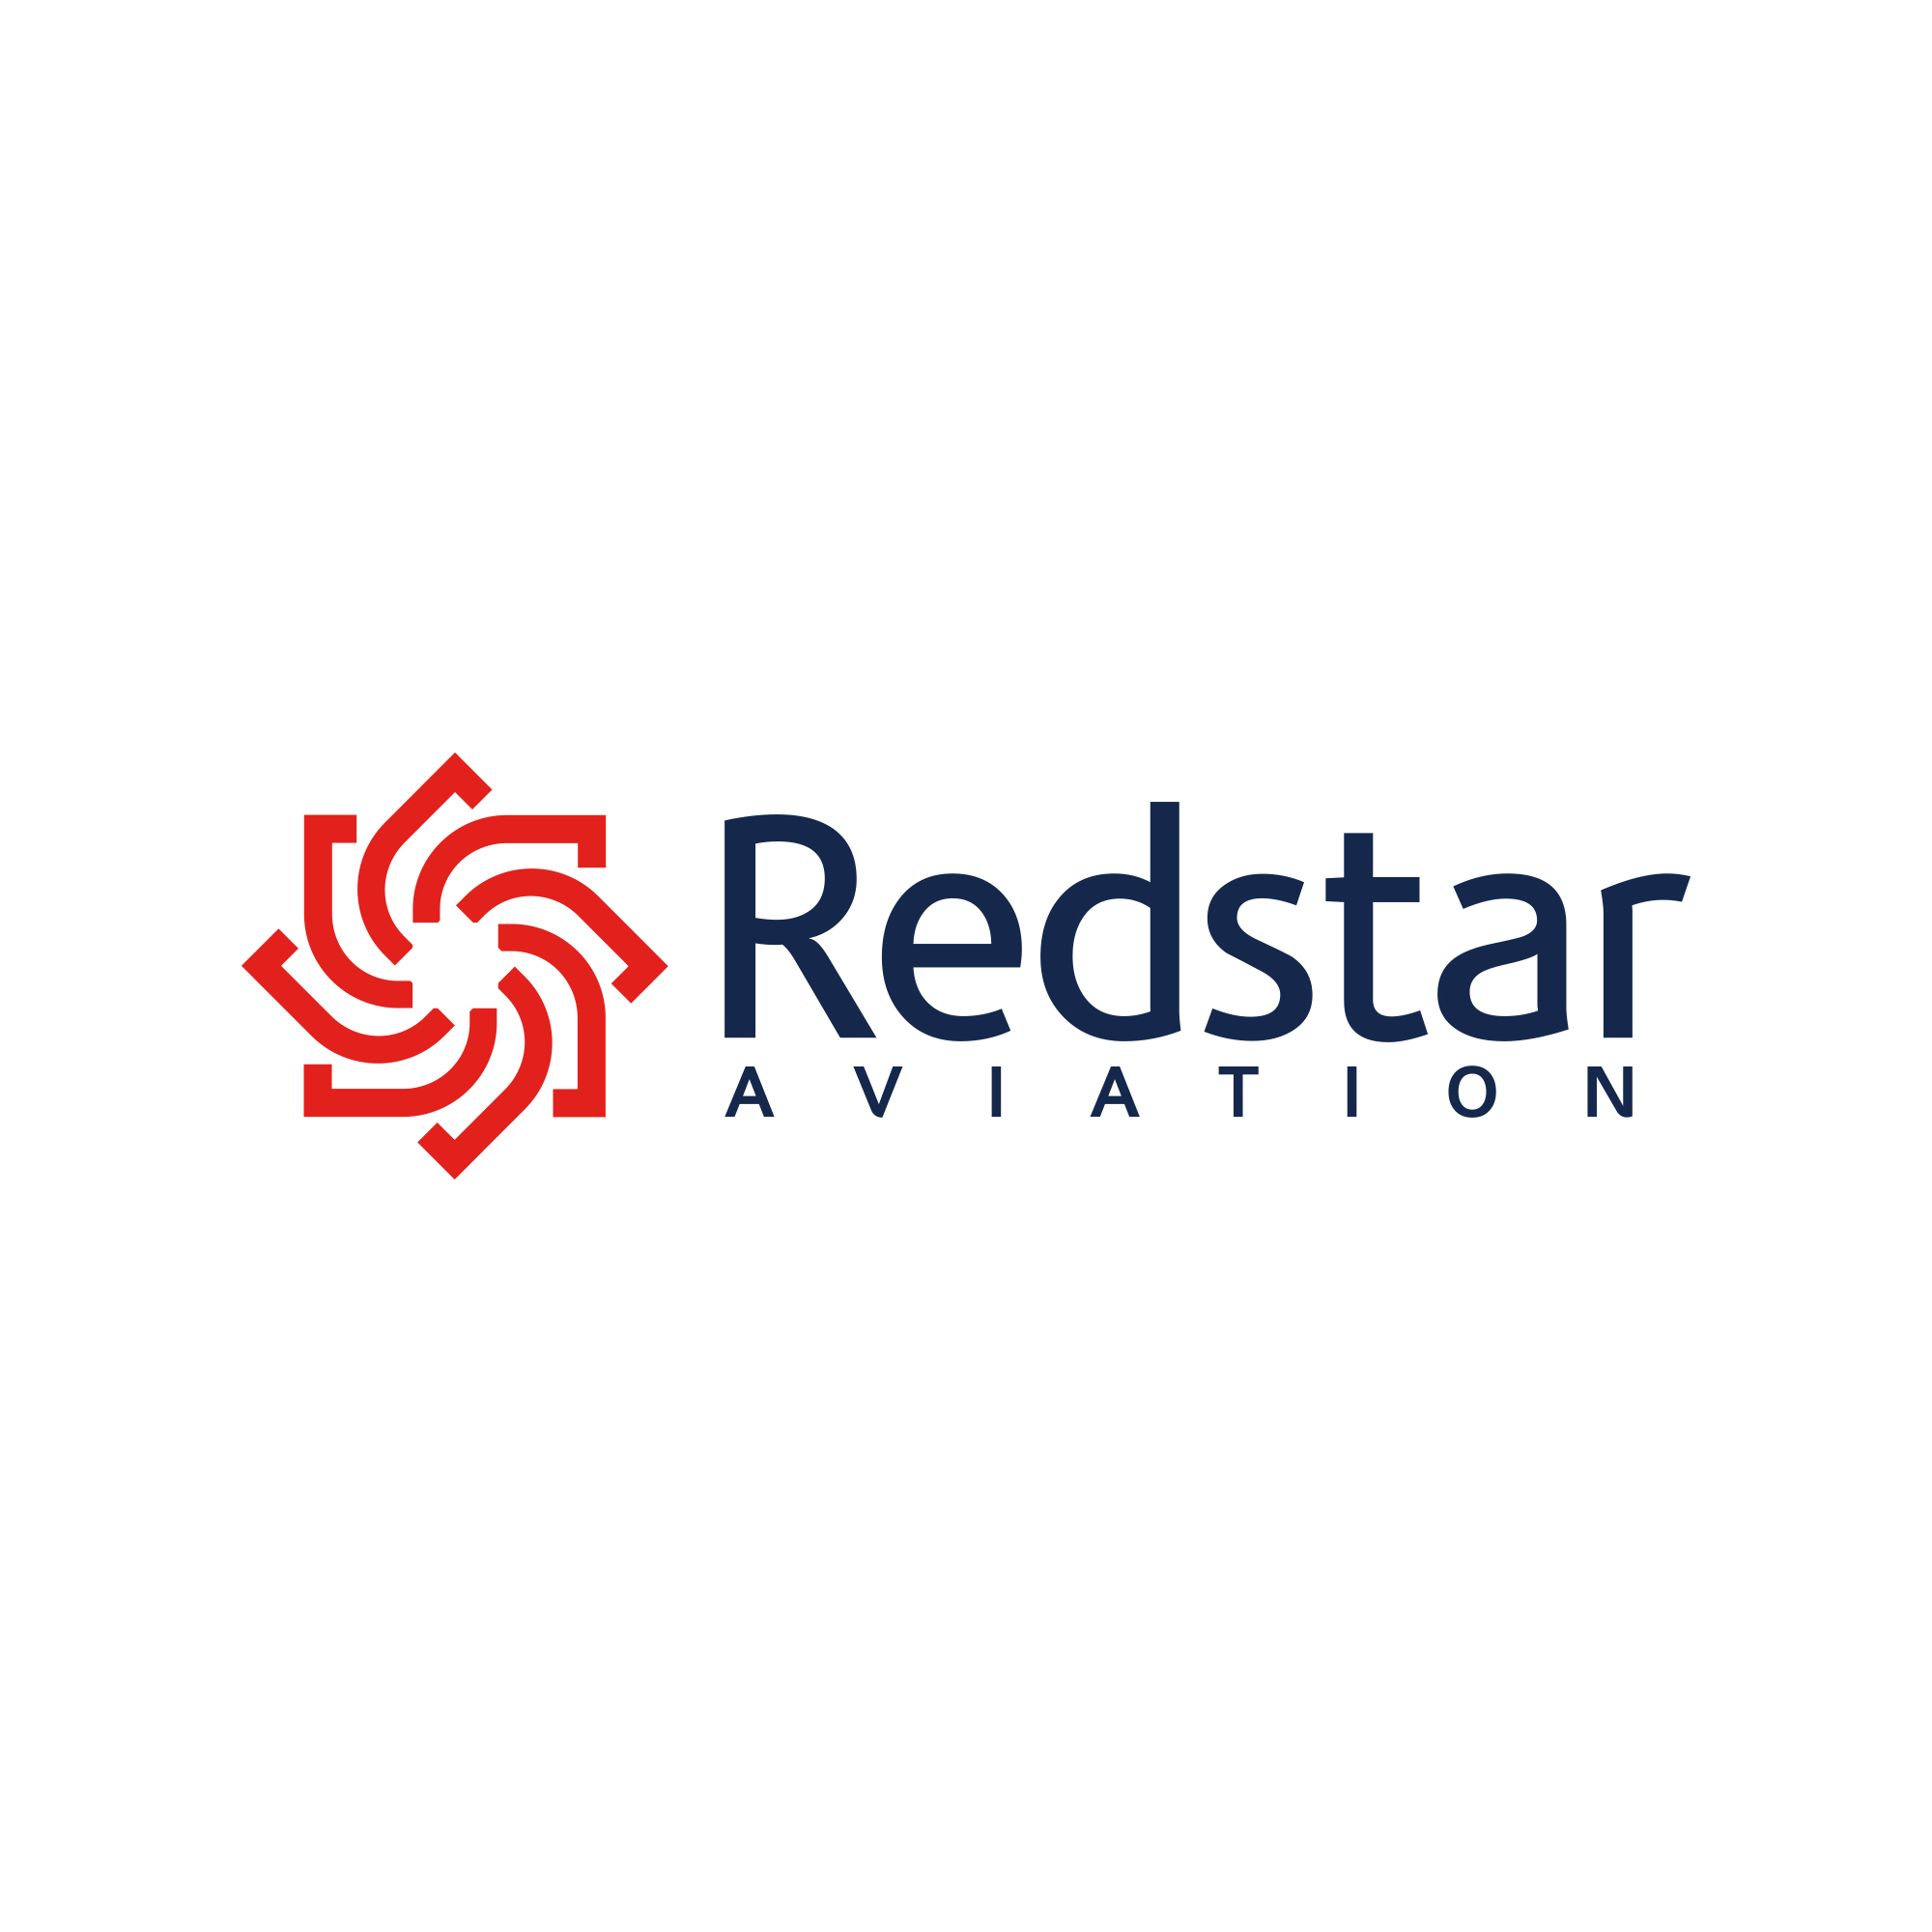 Redstar’s New Brand Logo: a Redesign to Reflect our Developing Values and Growing Investments